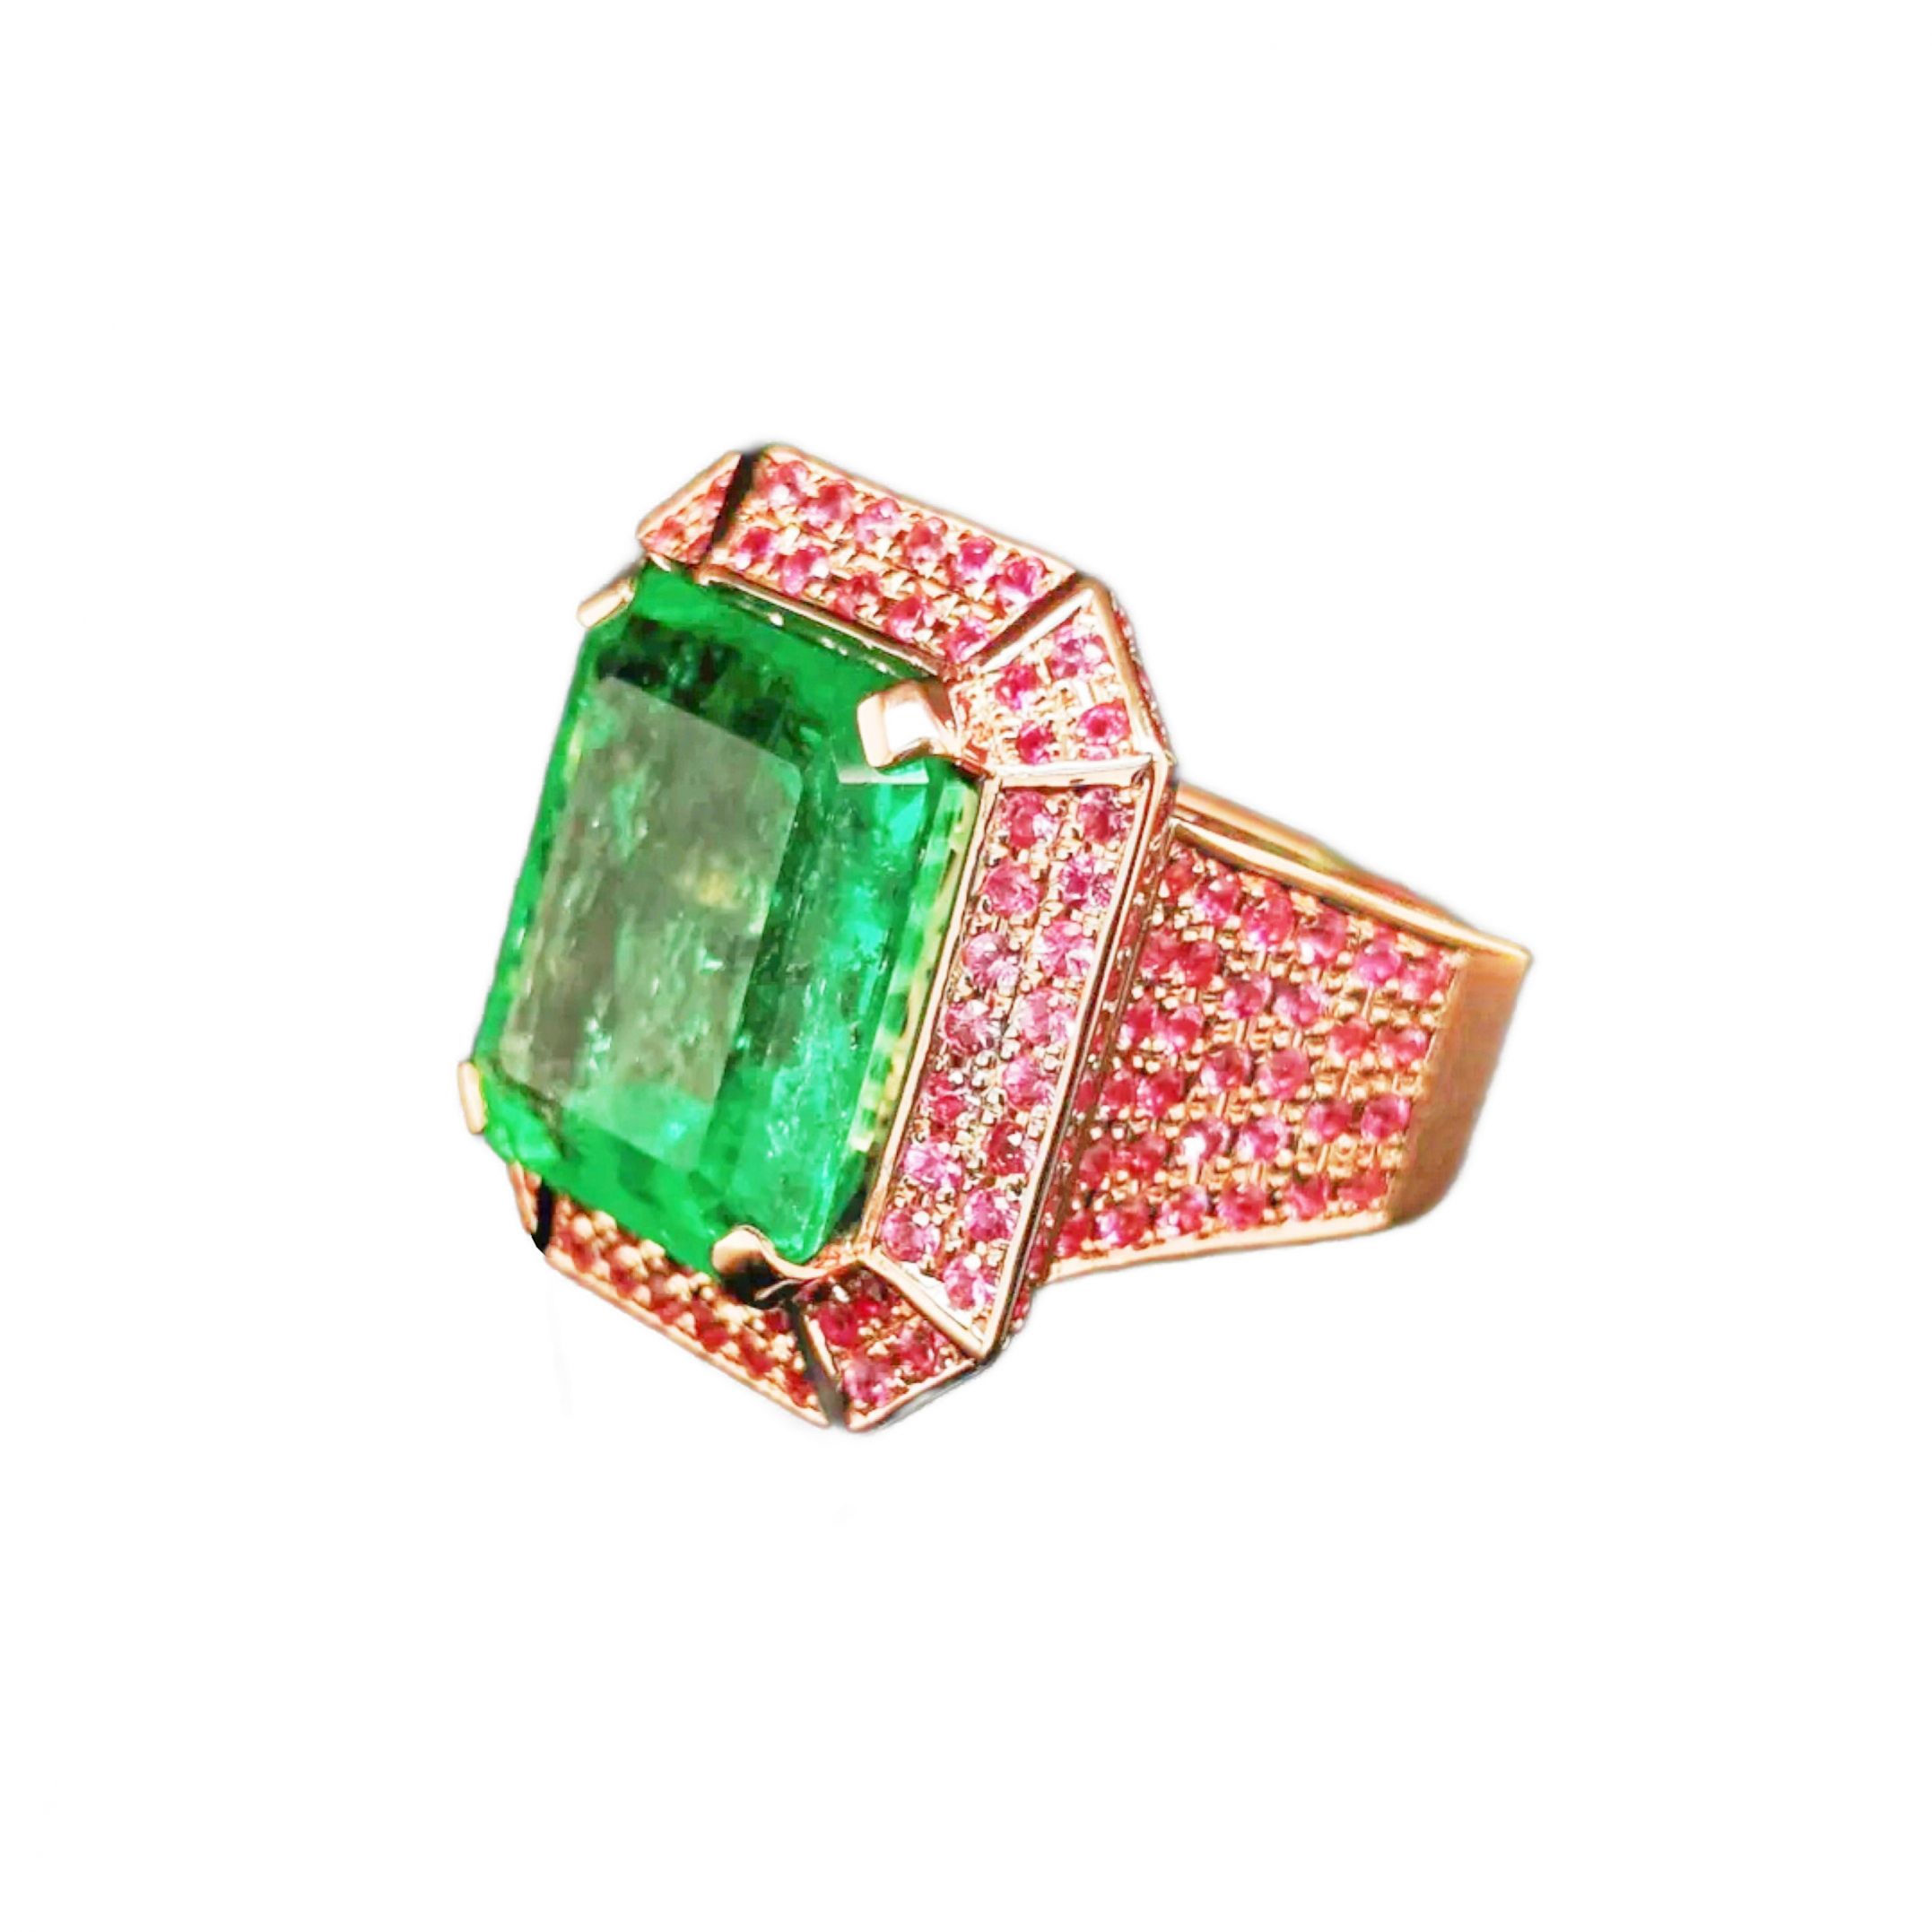 12.30 ct Colombian emerald ring with 2.15ct pink sapphires in 18k gold.